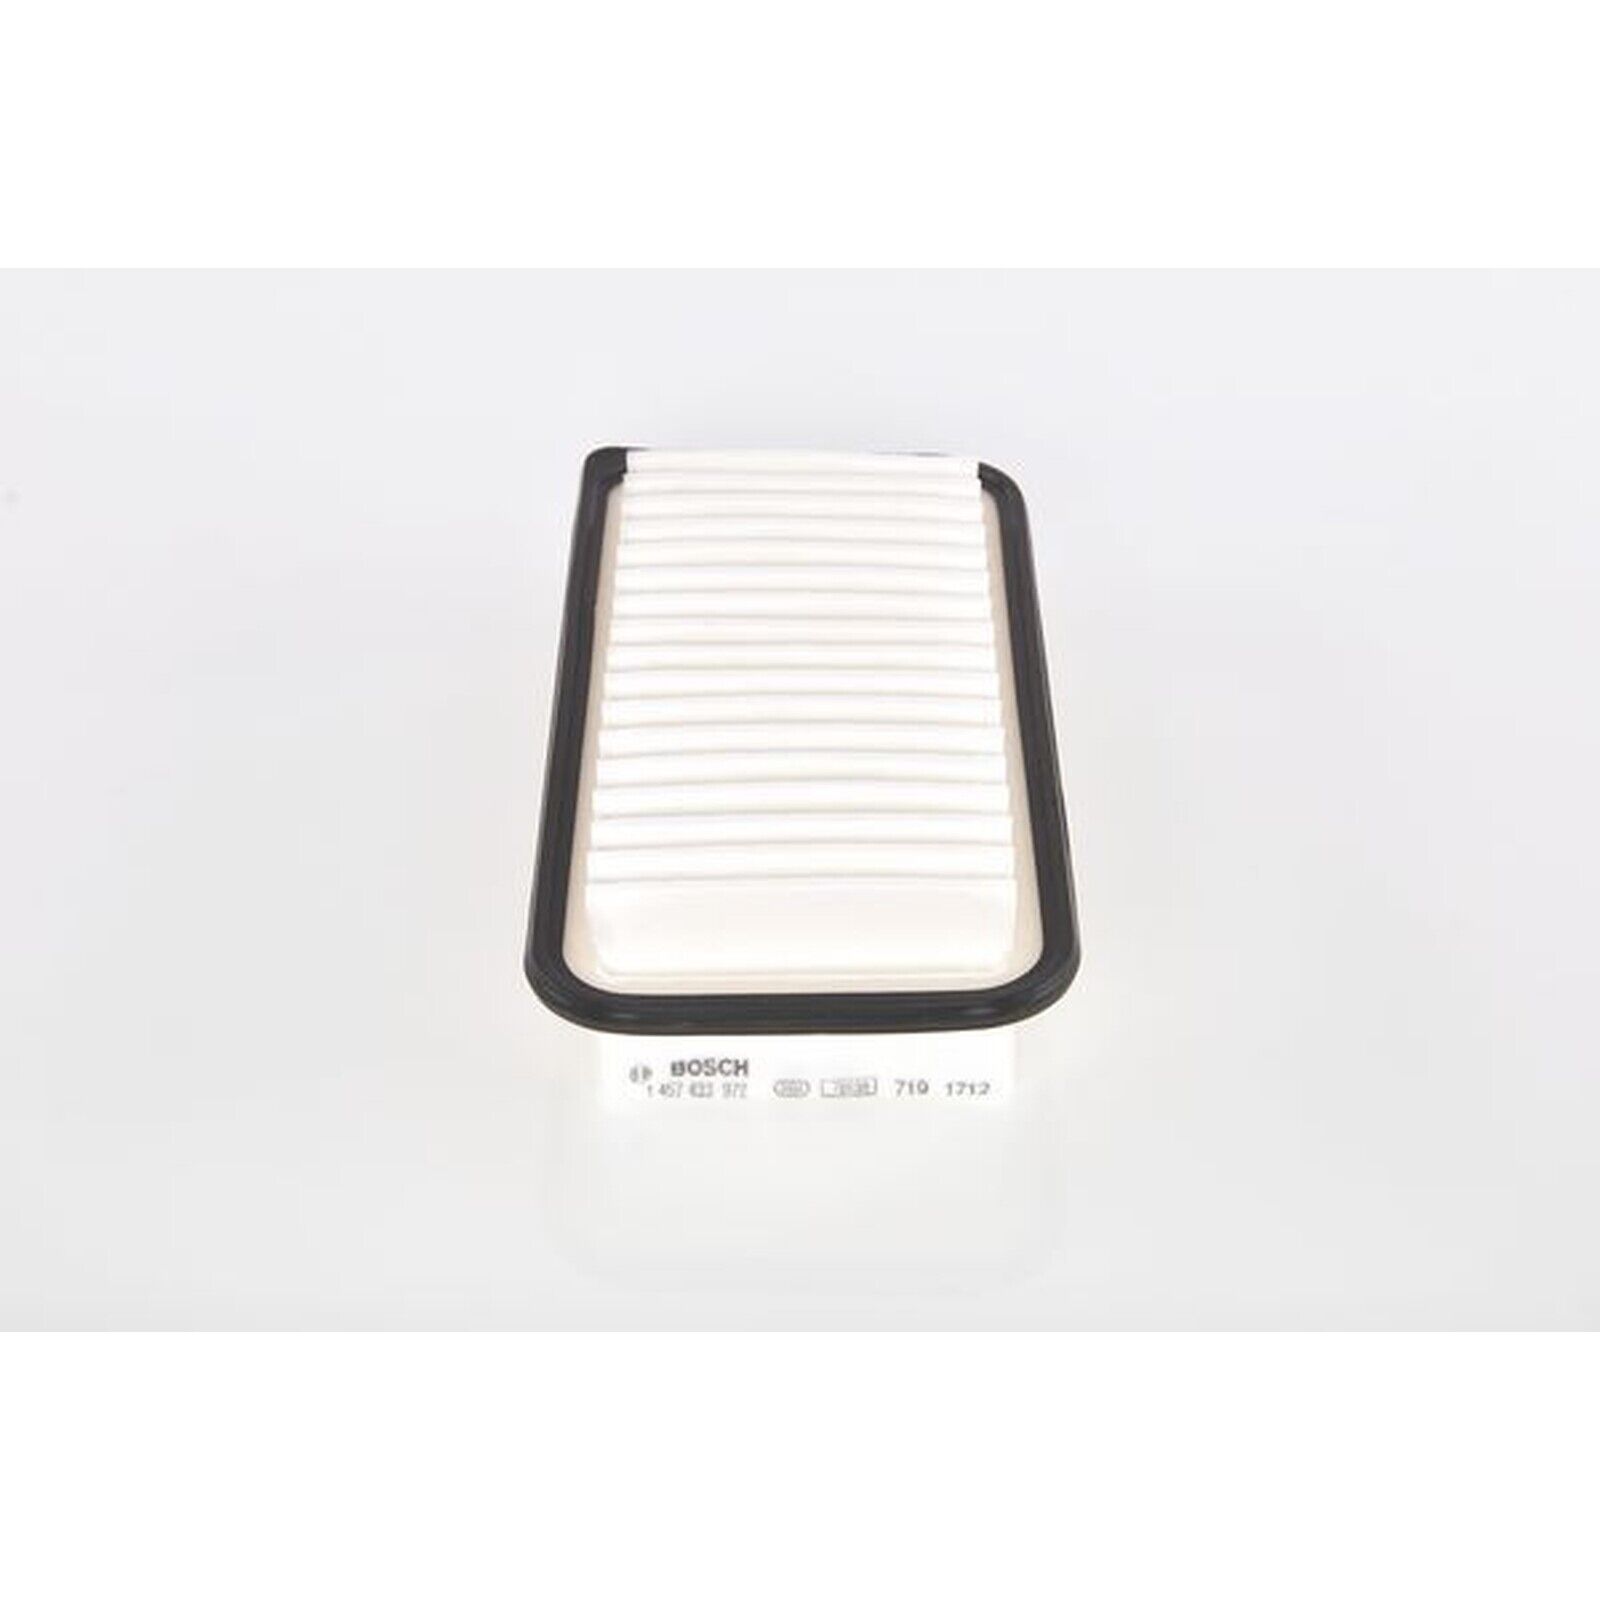 Bosch Paper Air Filter Insert S3972 OEM Quality for Daihatsu Charade & Toyota